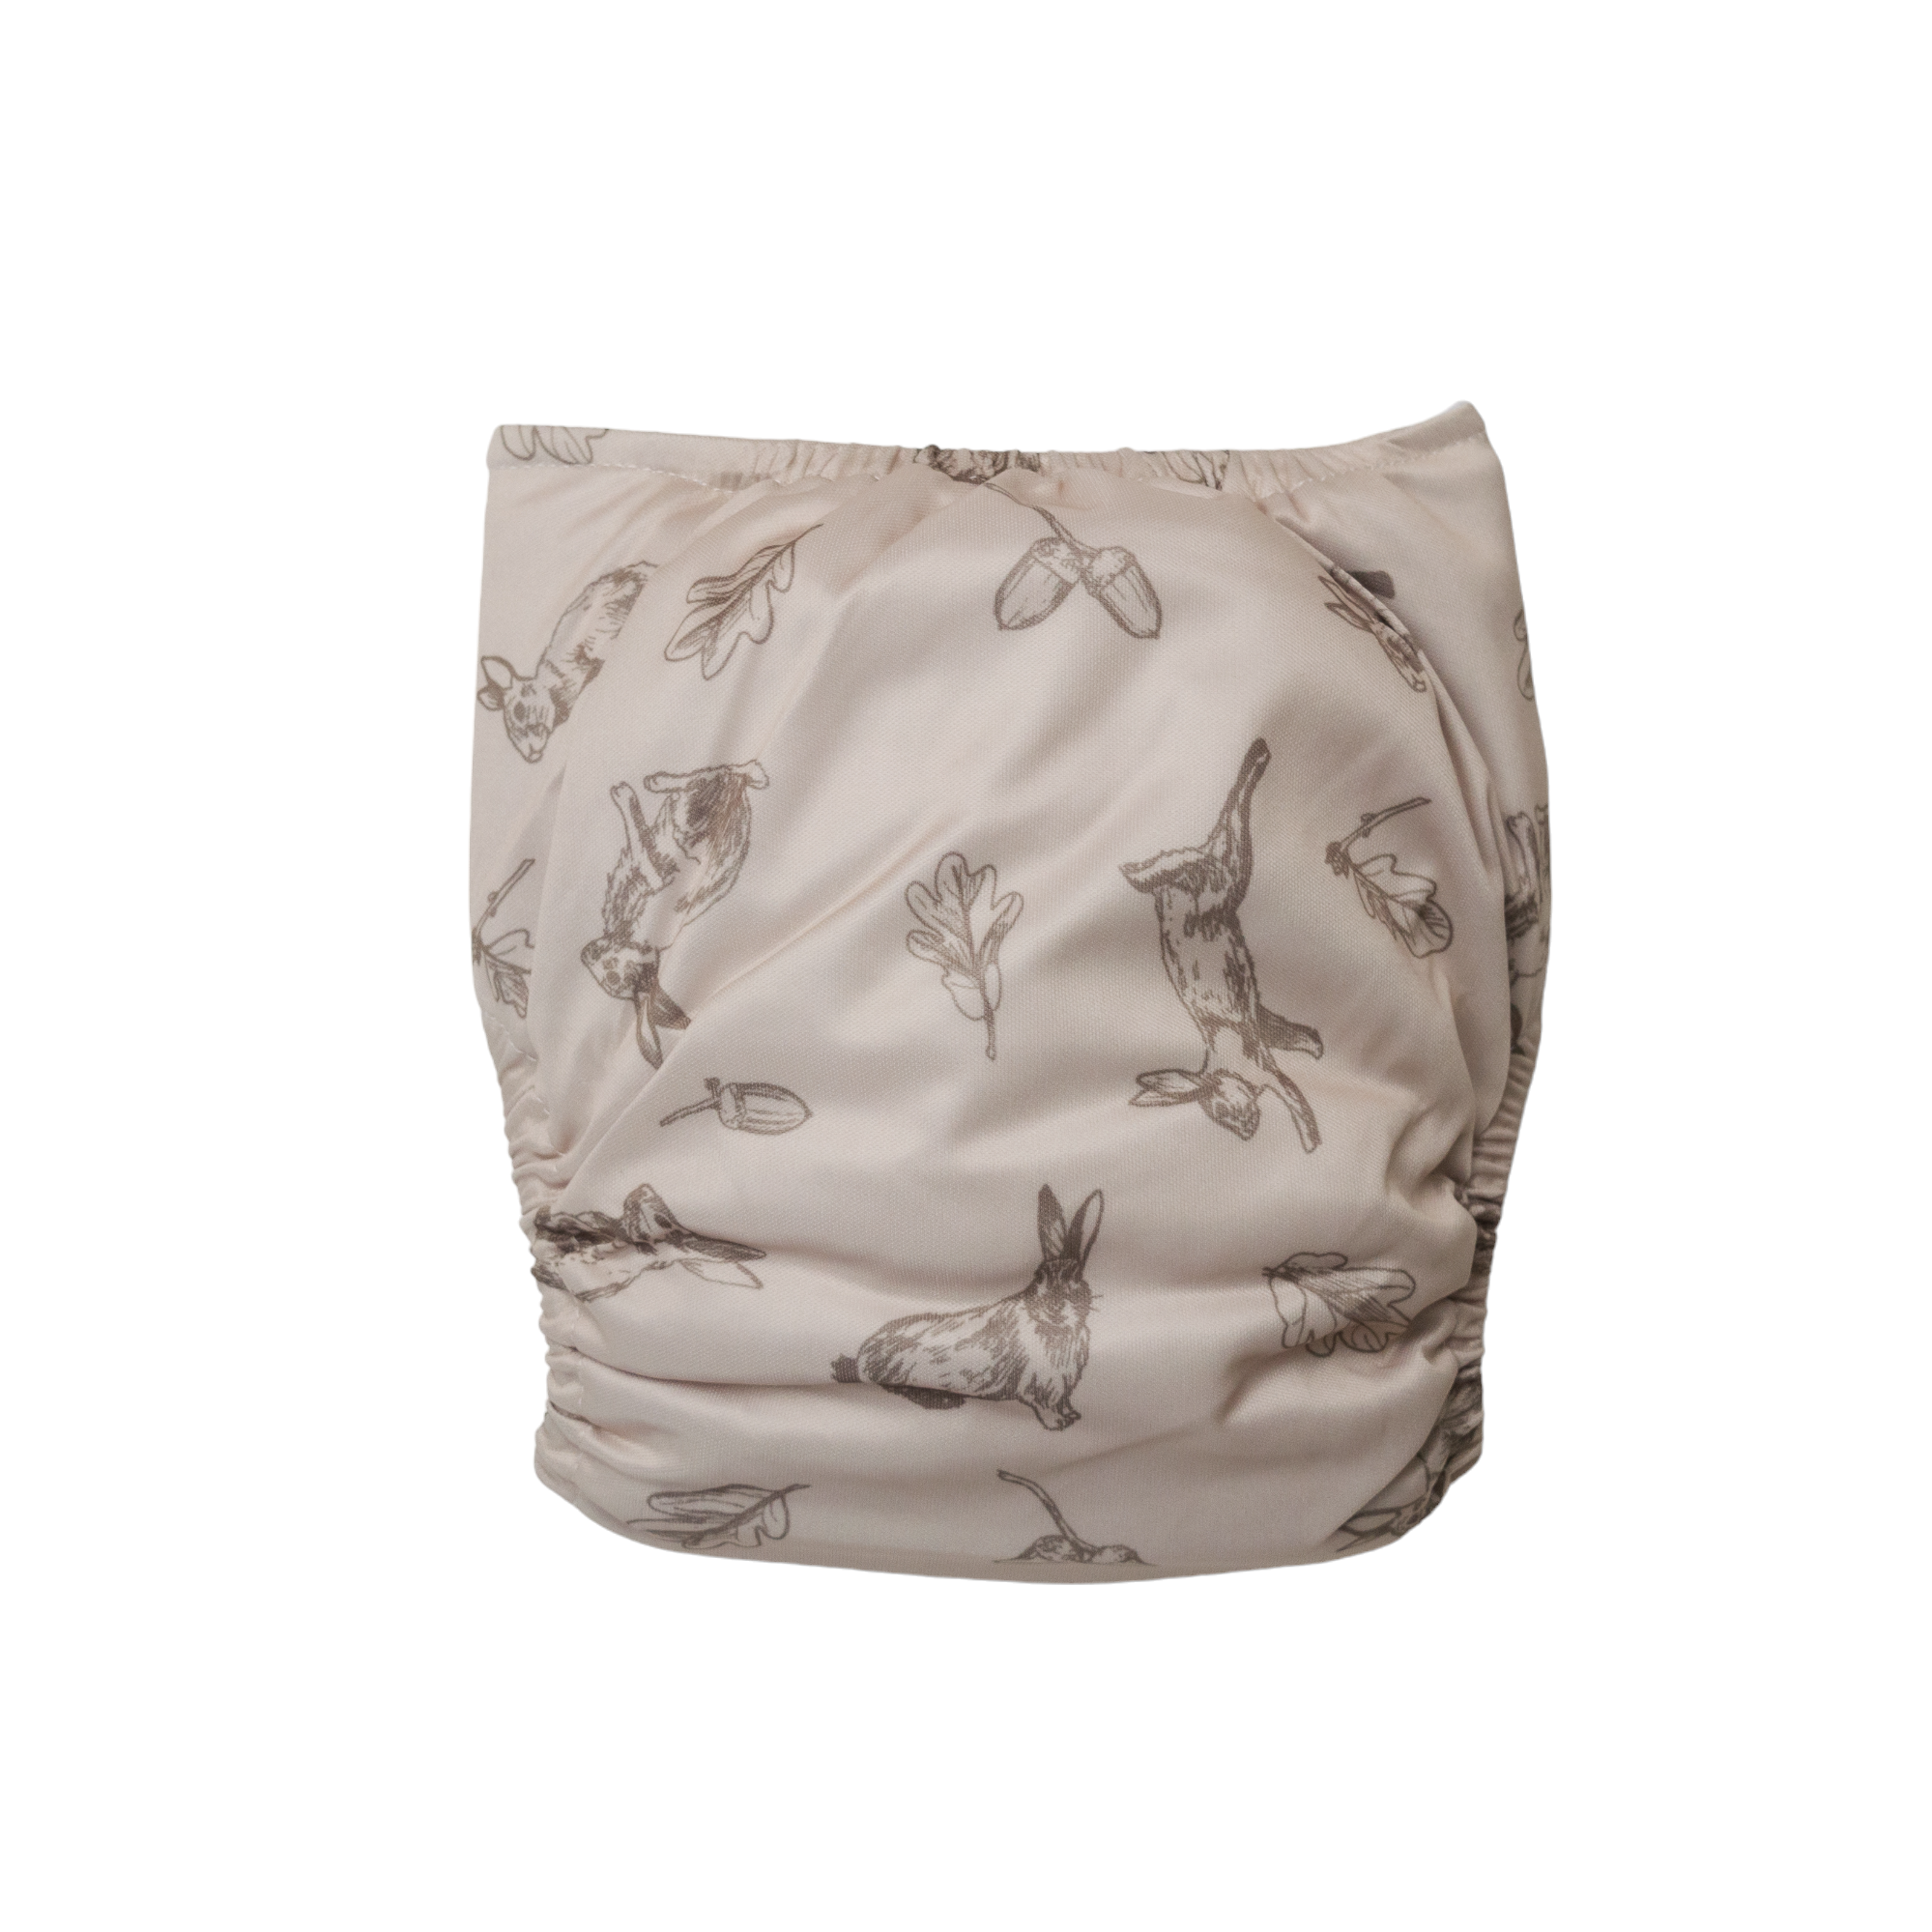 Nestling SNAP Nappy Cover - Oatmeal Rabbit